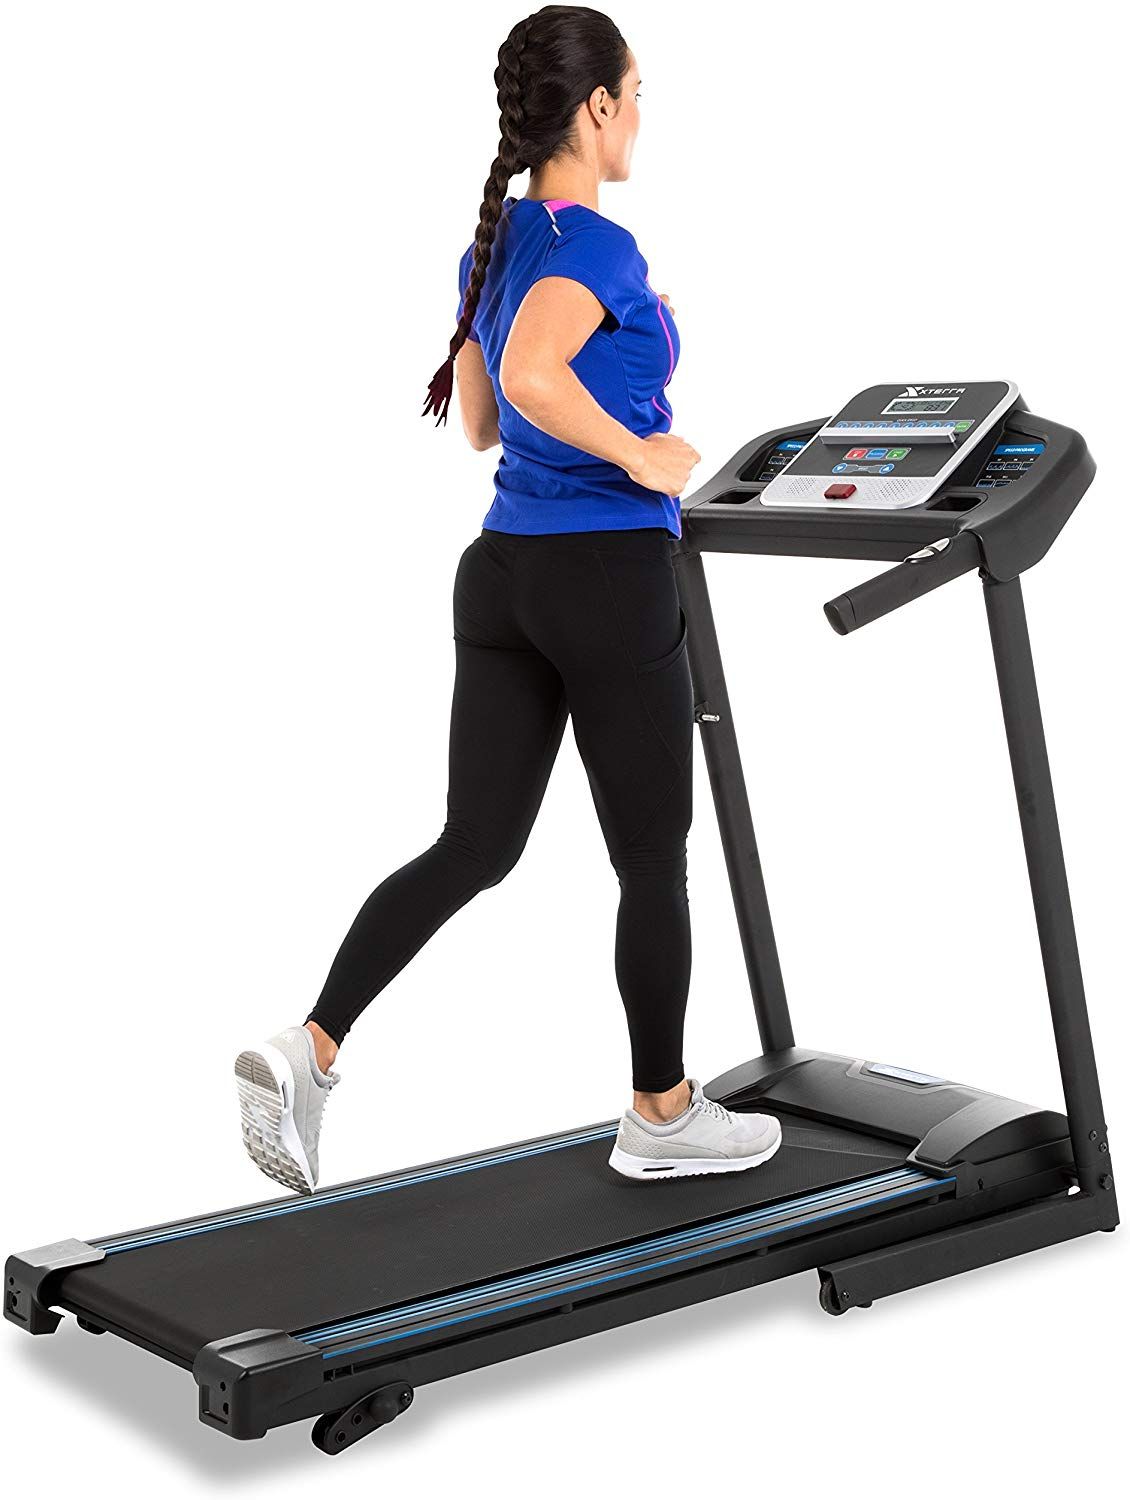 Home Exercise Equipment Where To Get Treadmills Indoor Bikes